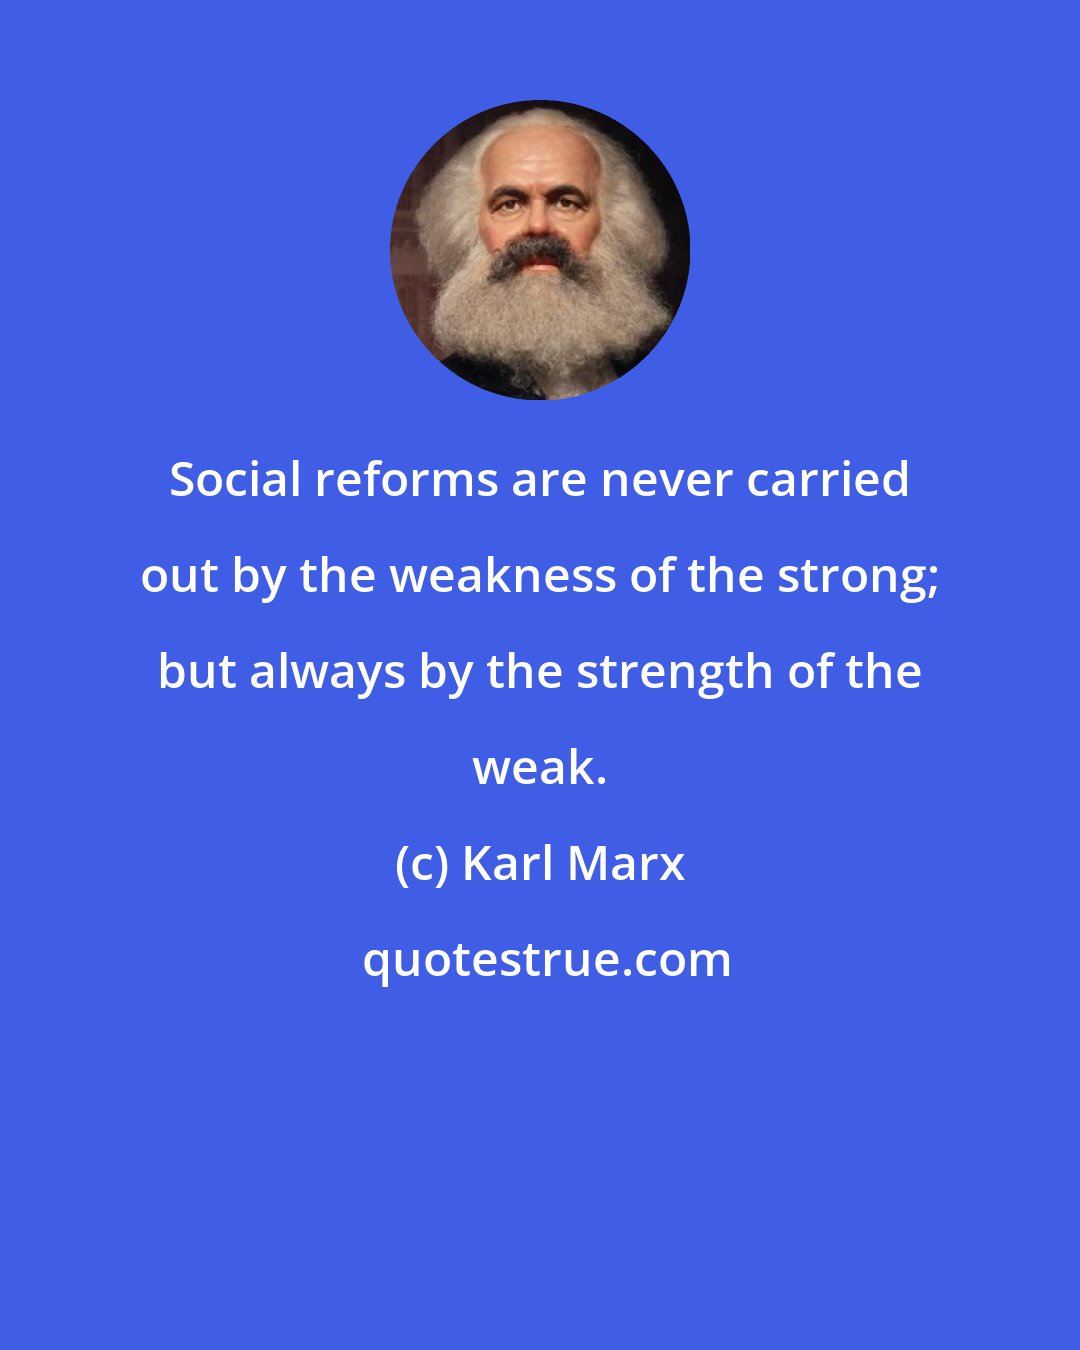 Karl Marx: Social reforms are never carried out by the weakness of the strong; but always by the strength of the weak.